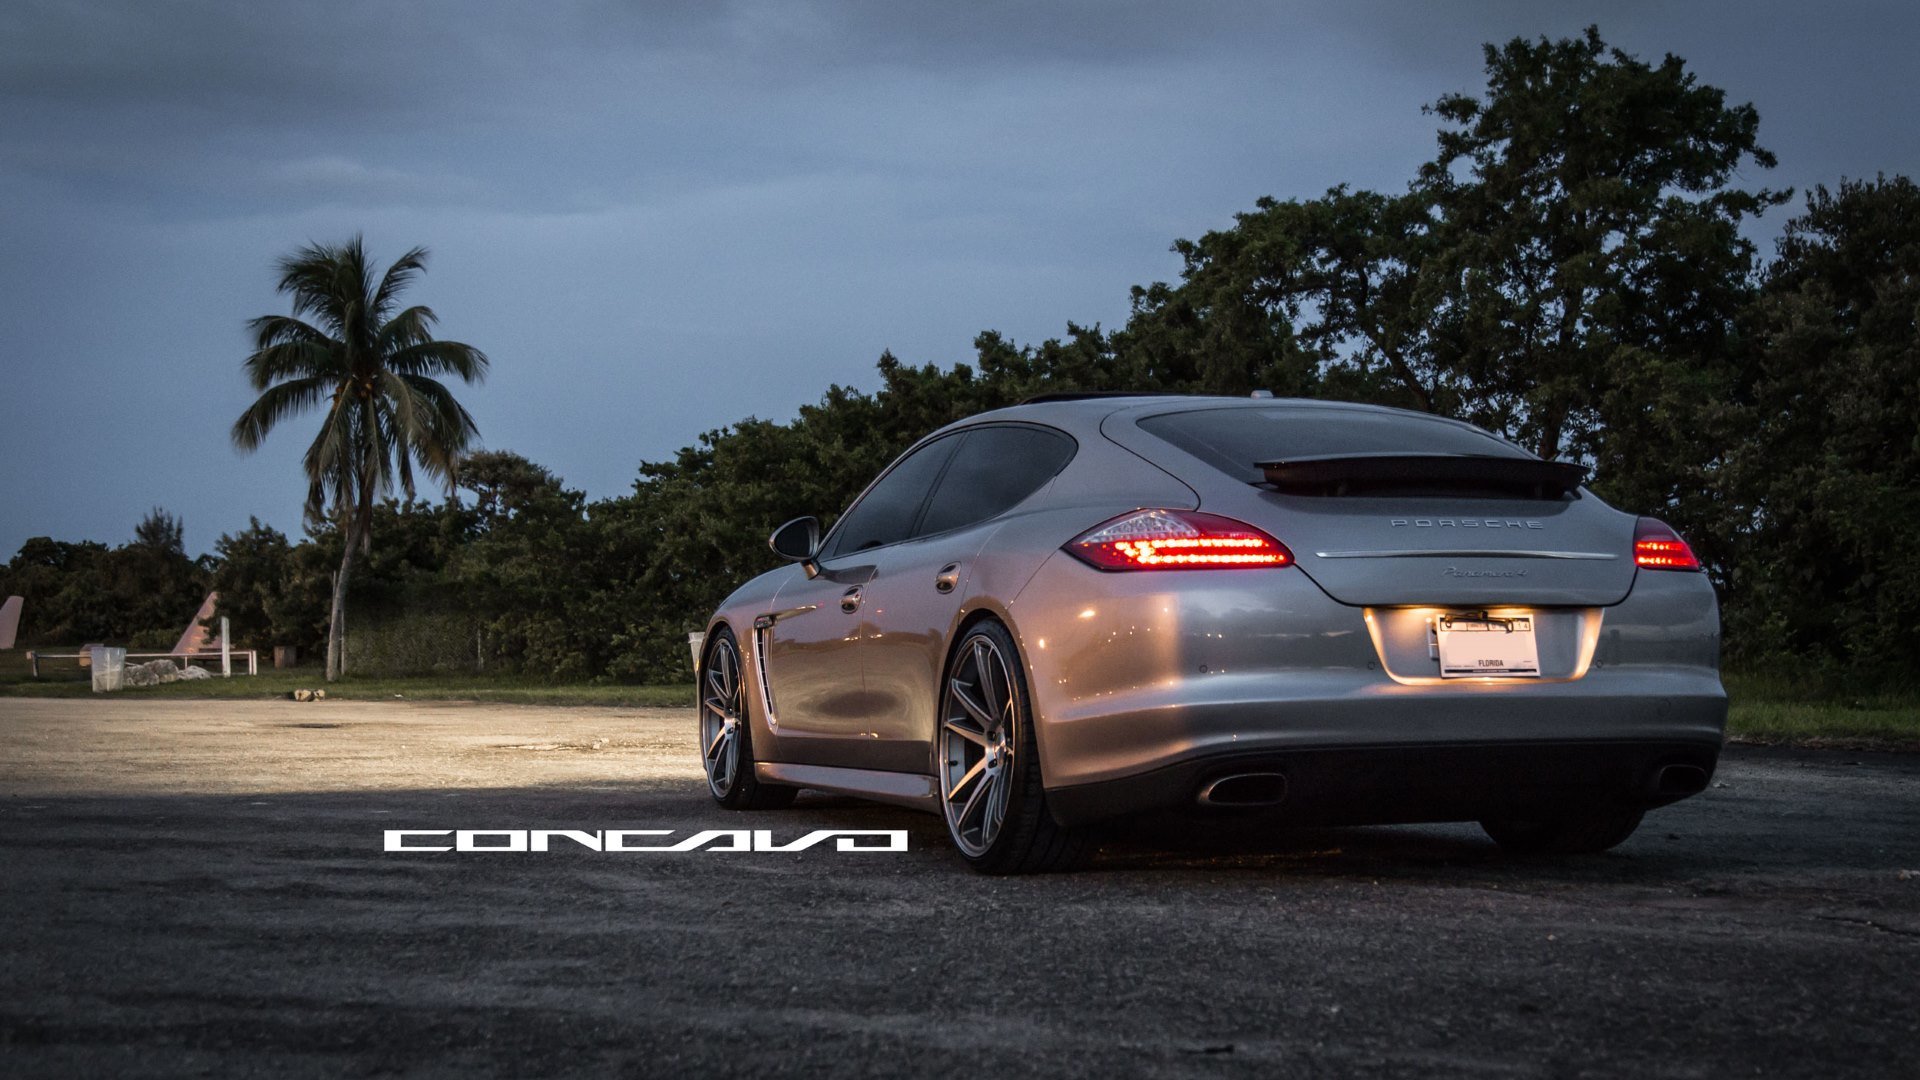 Download full hd 1920x1080 Porsche Panamera computer background ID:27806 for free